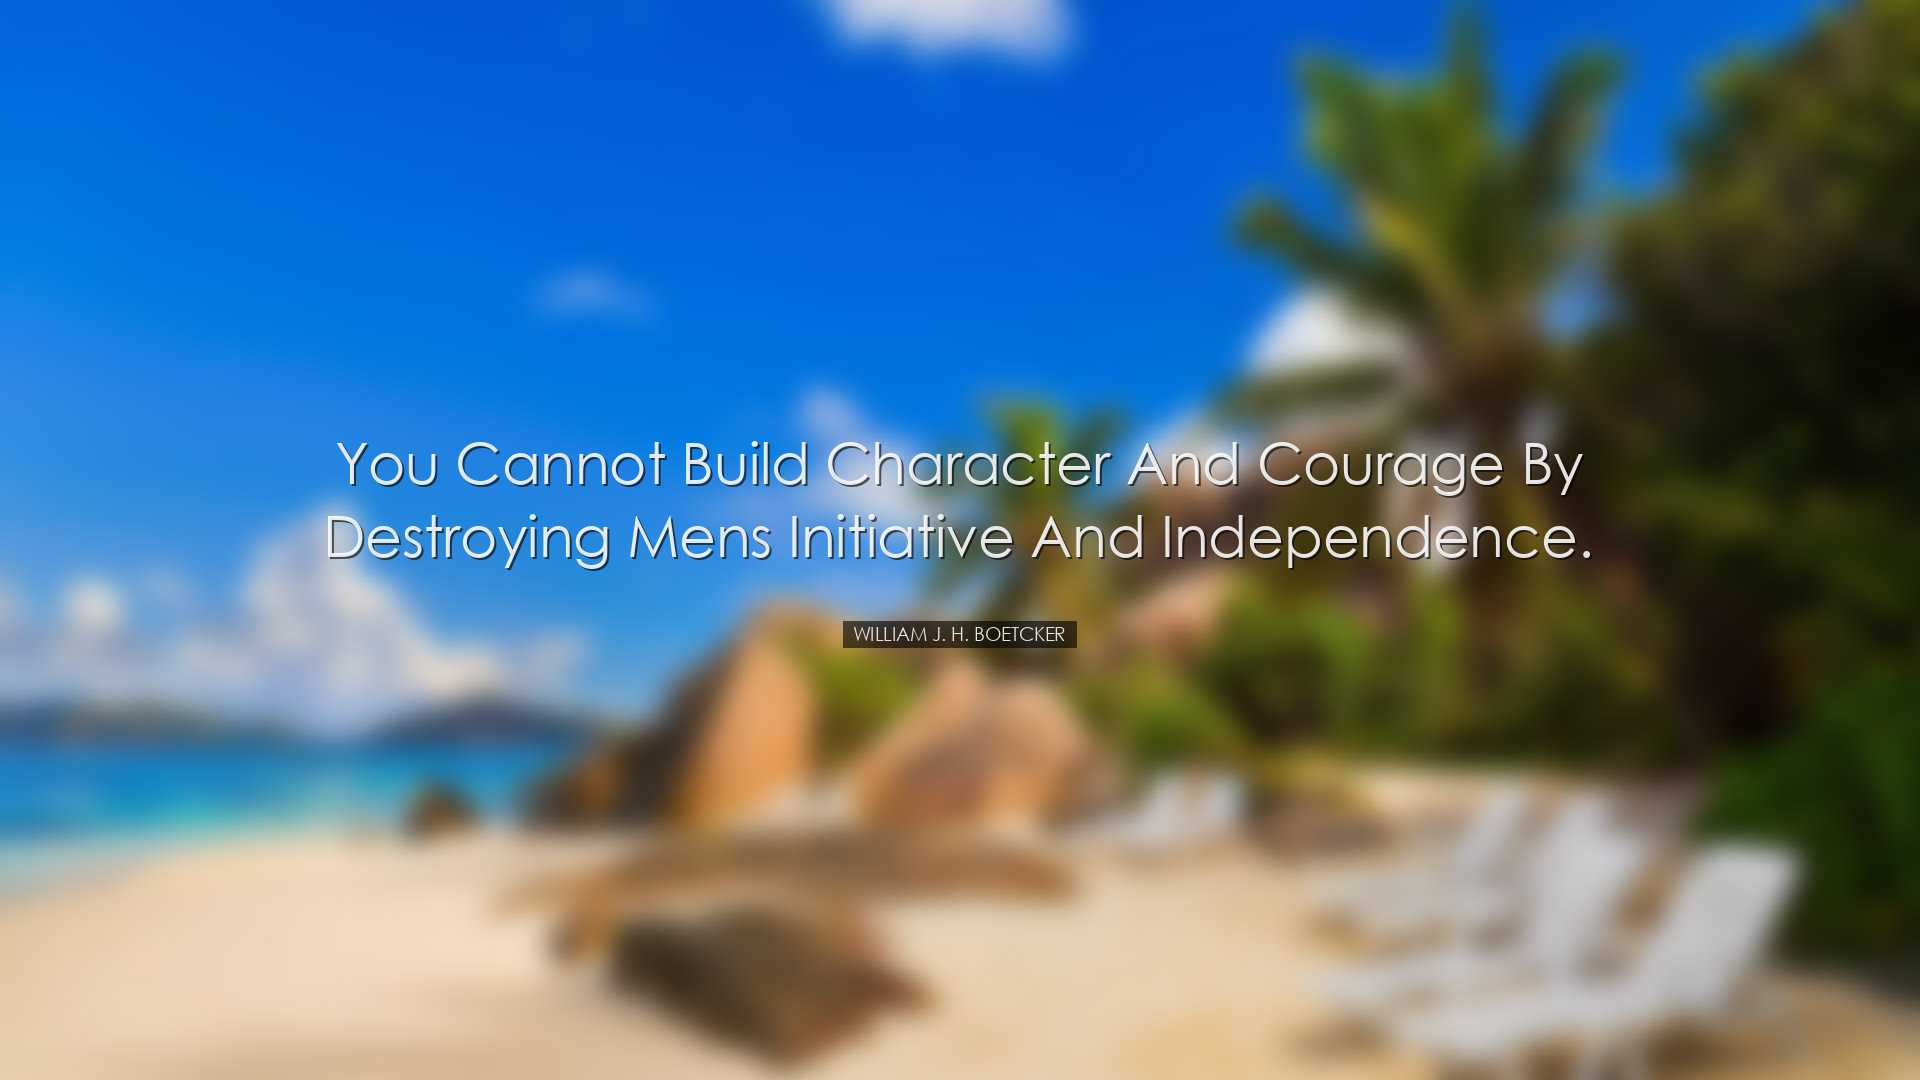 You cannot build character and courage by destroying mens initiati